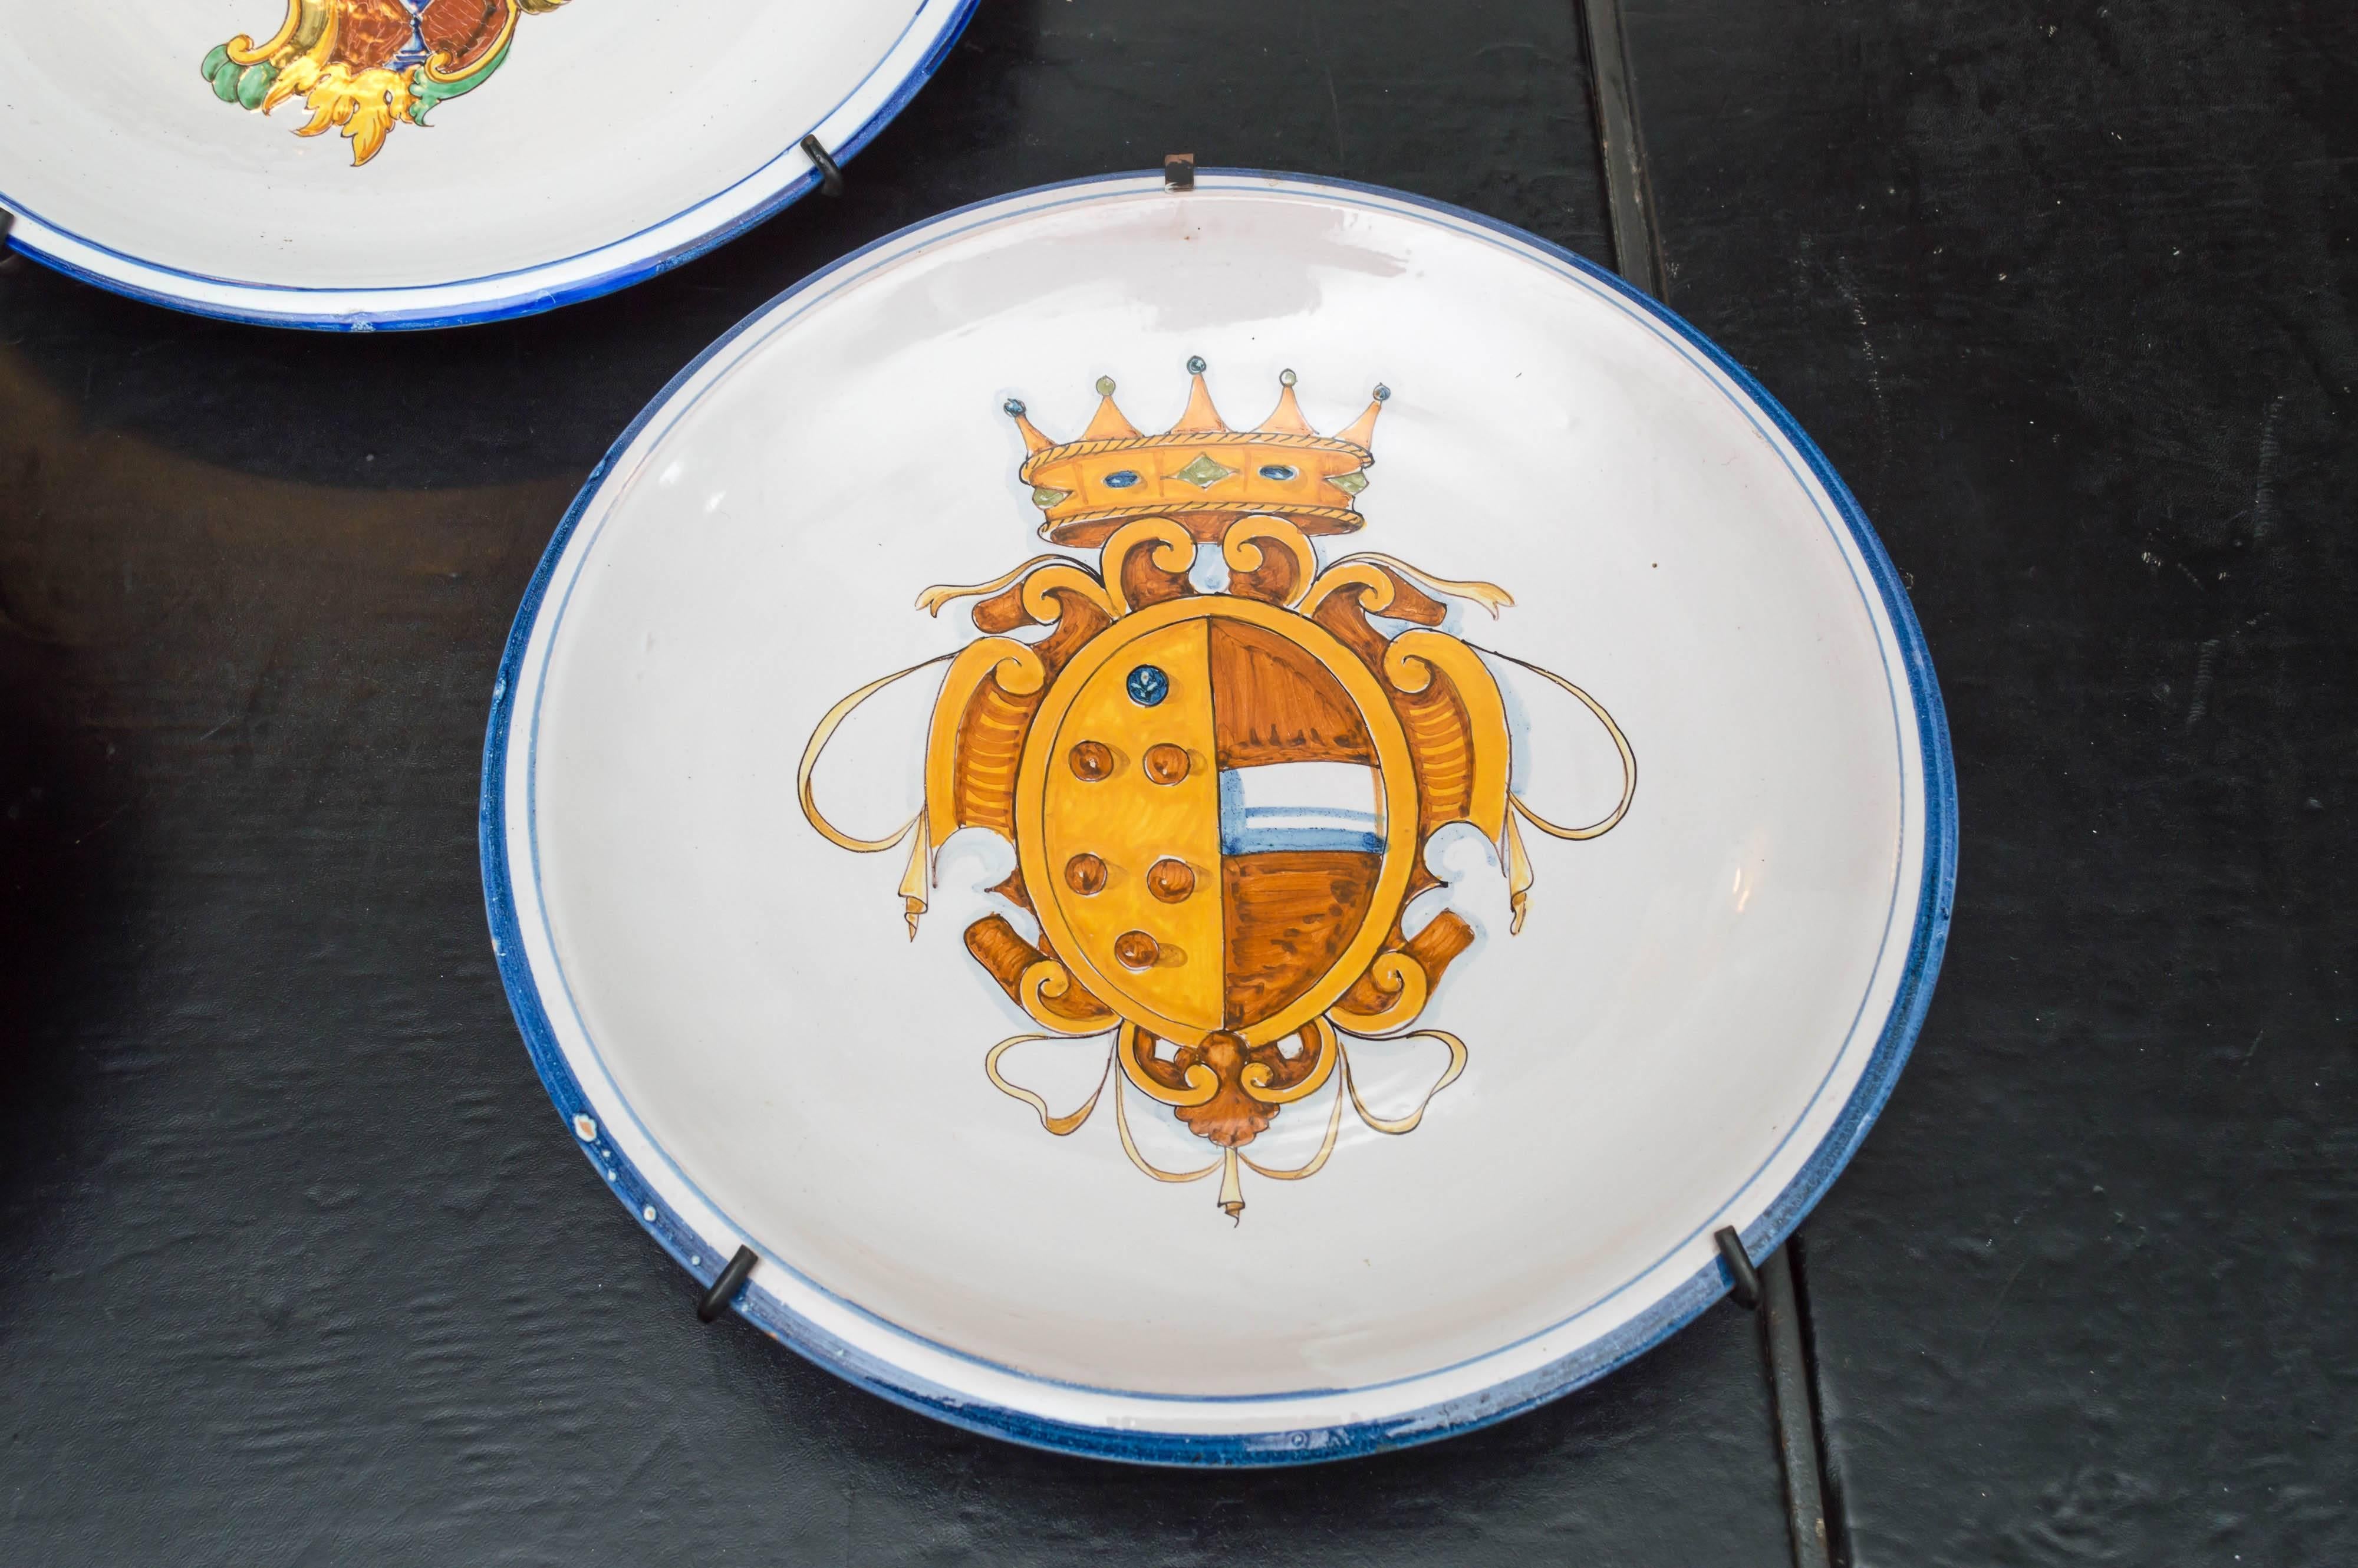 A set of three, late 19th century. Italian Majolica plates / chargers. Decorated with armorial crests of three different designs. Very good drawing and precise application of glazes. Two plates are signed M. Cupi 1892. These two have a deeper bowl